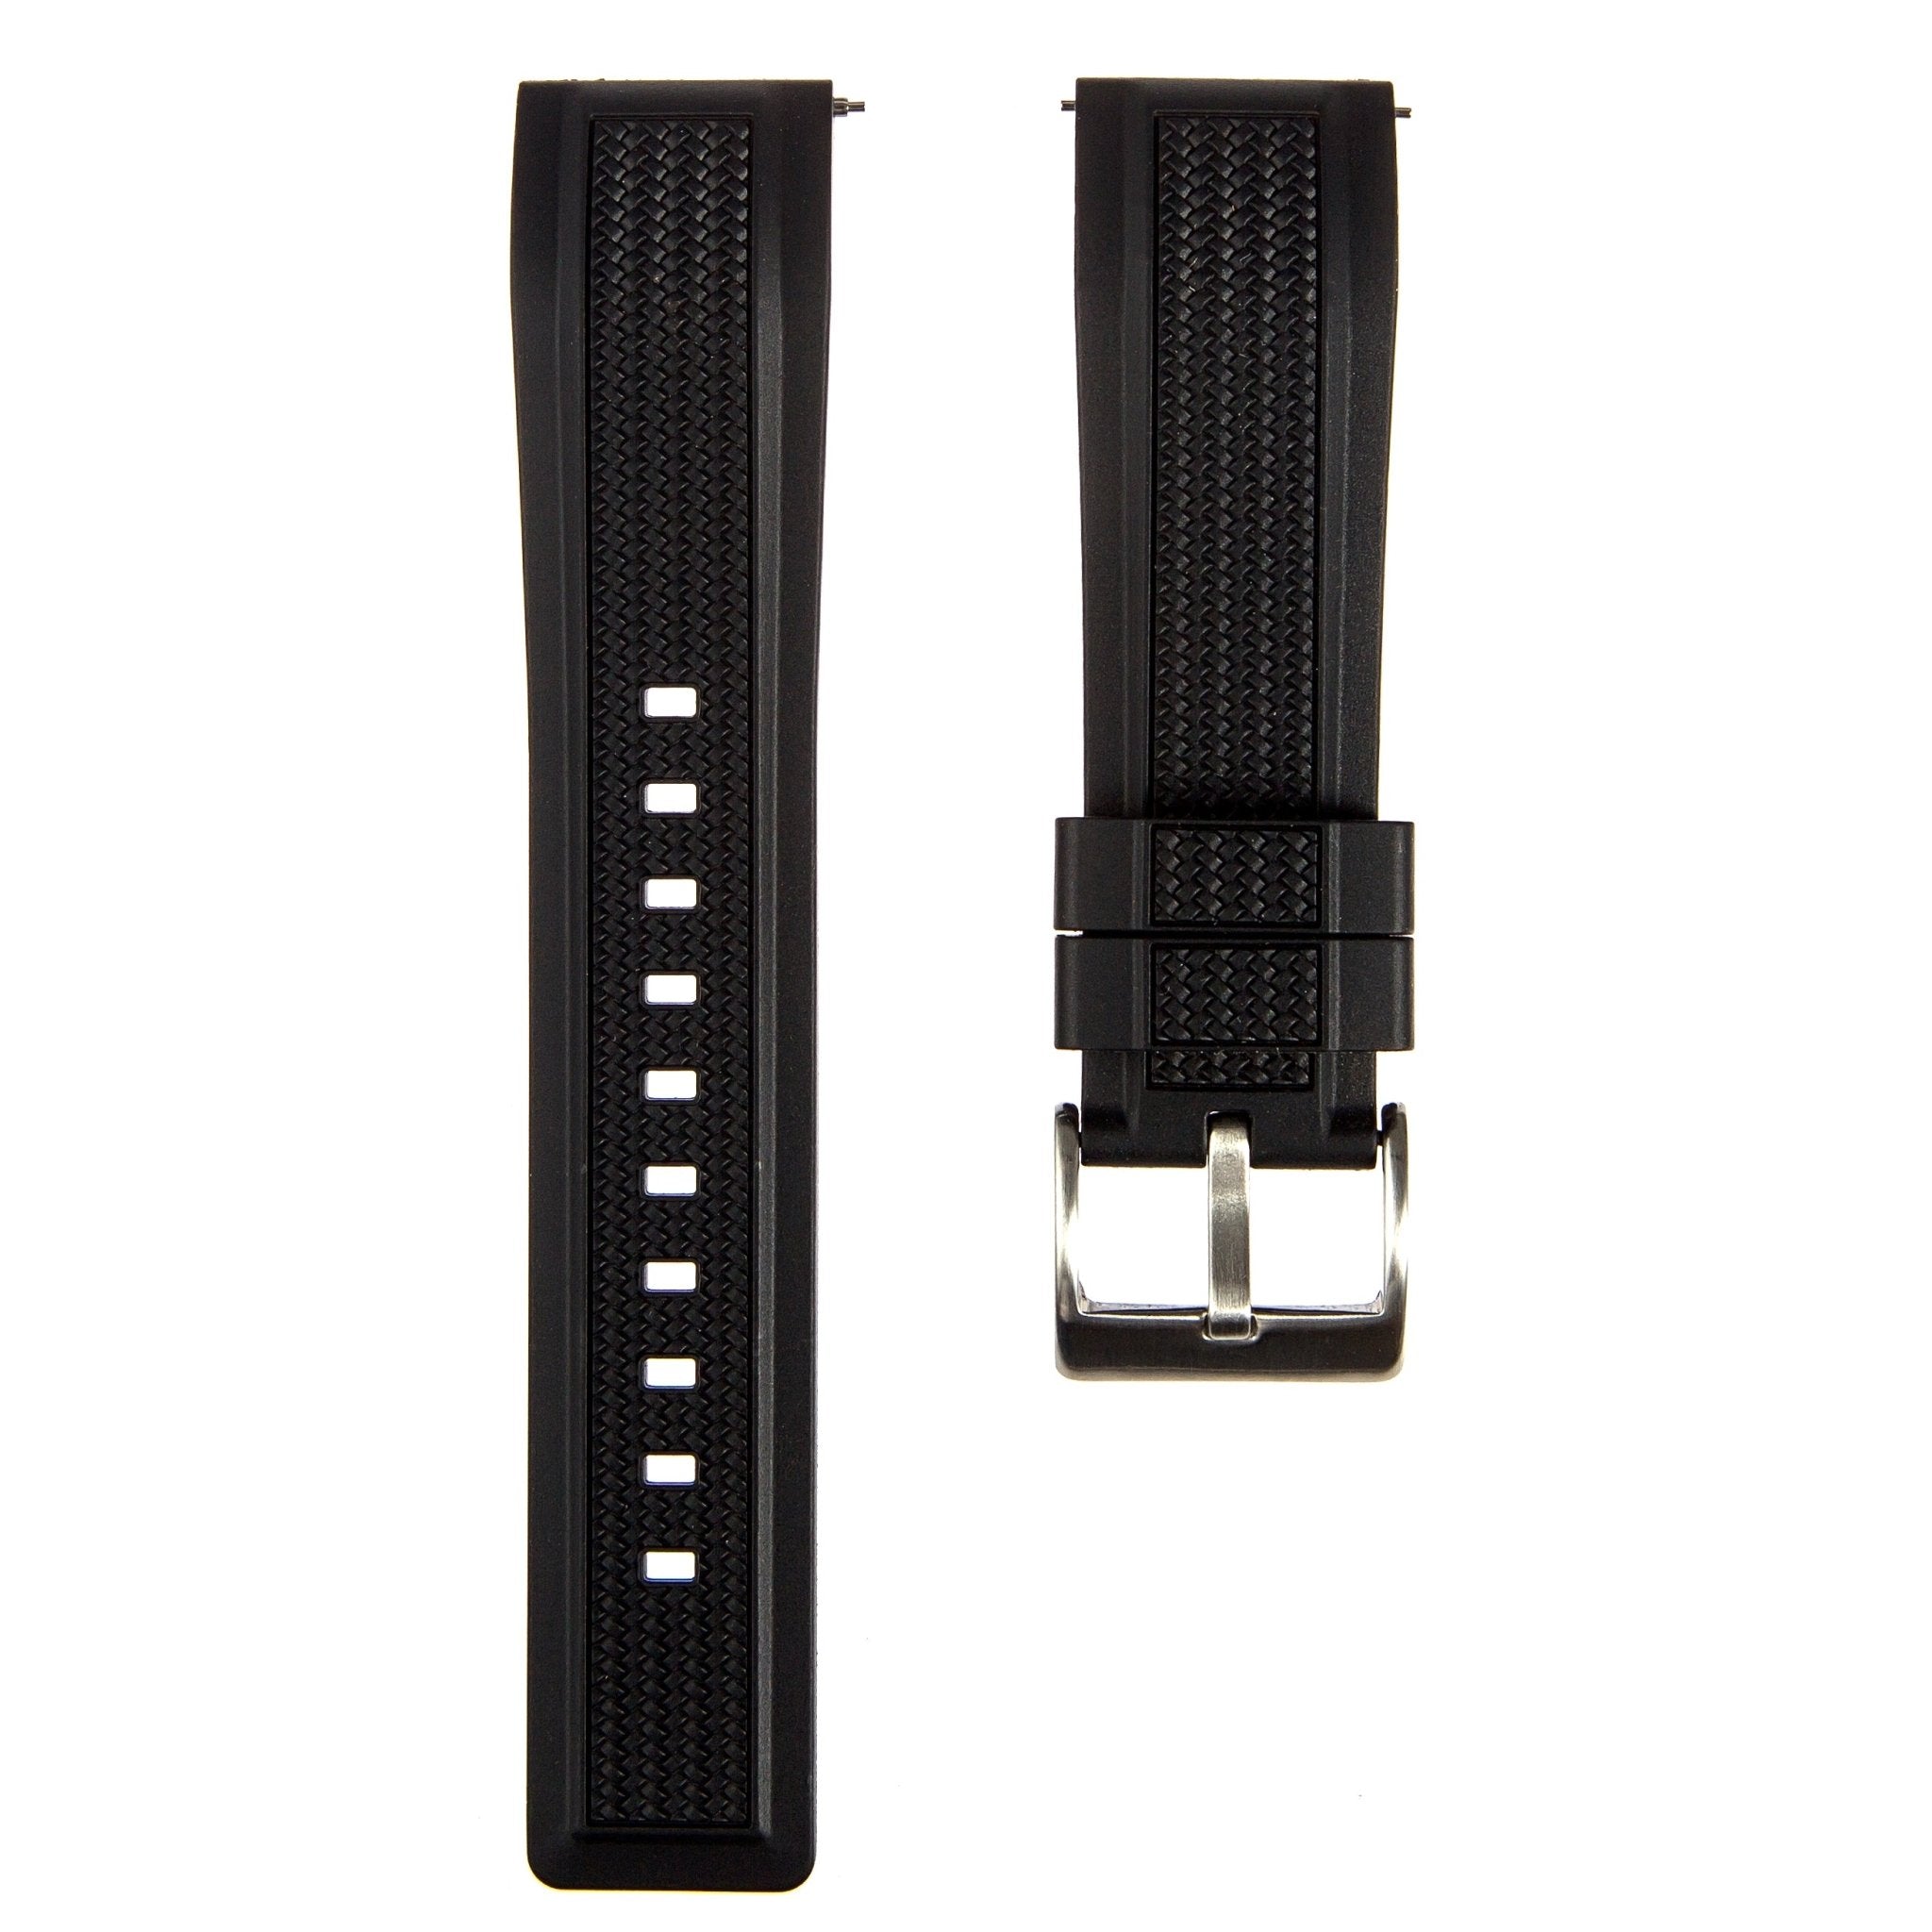 Stryke Premium SIlicone Rubber Strap - Quick-Release - Compatible with Blancpain x Swatch – Black (2424) -StrapSeeker